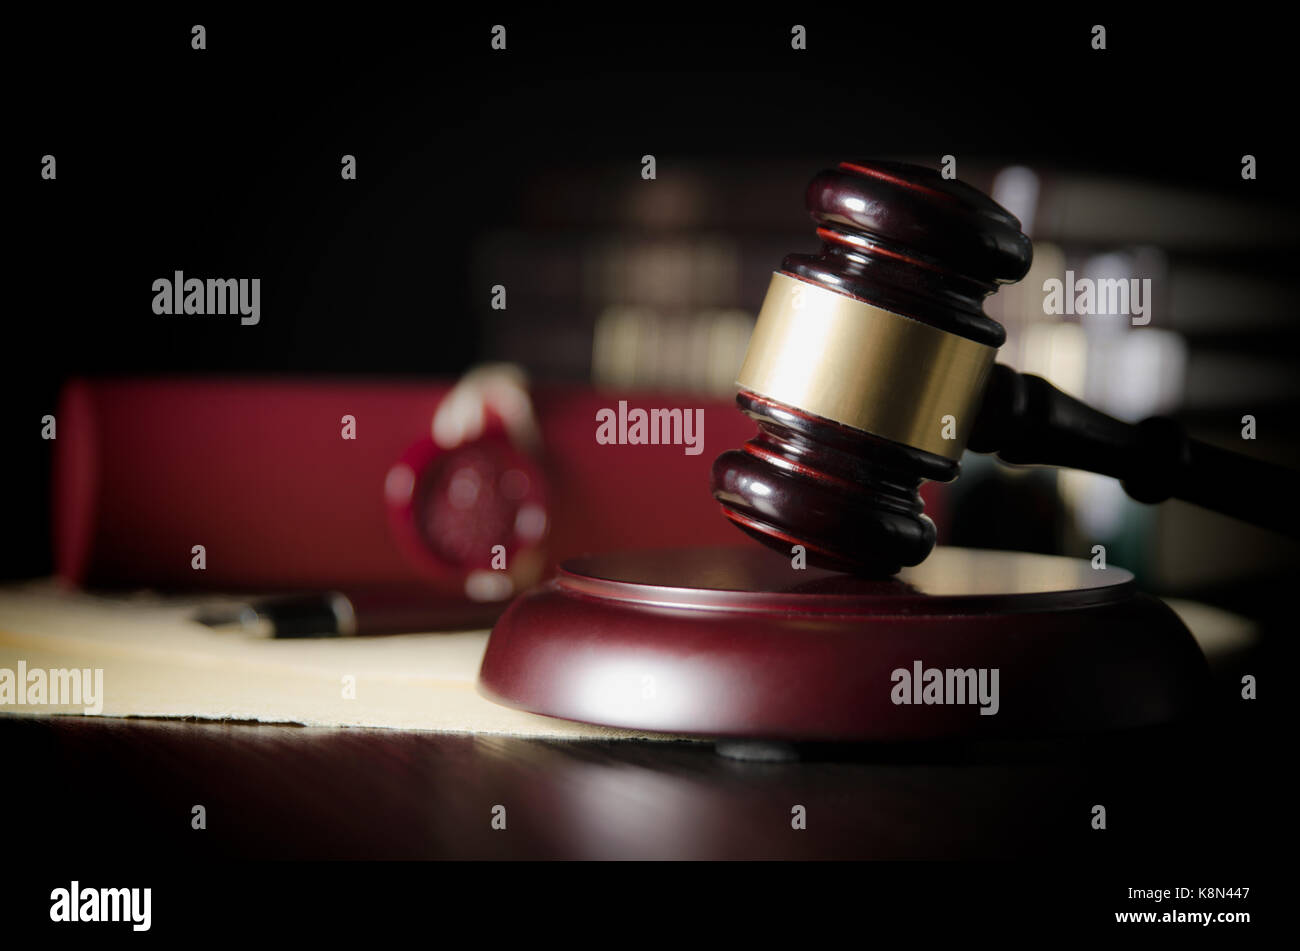 Law gavel in courtroom. Legal system justice concept. Stock Photo